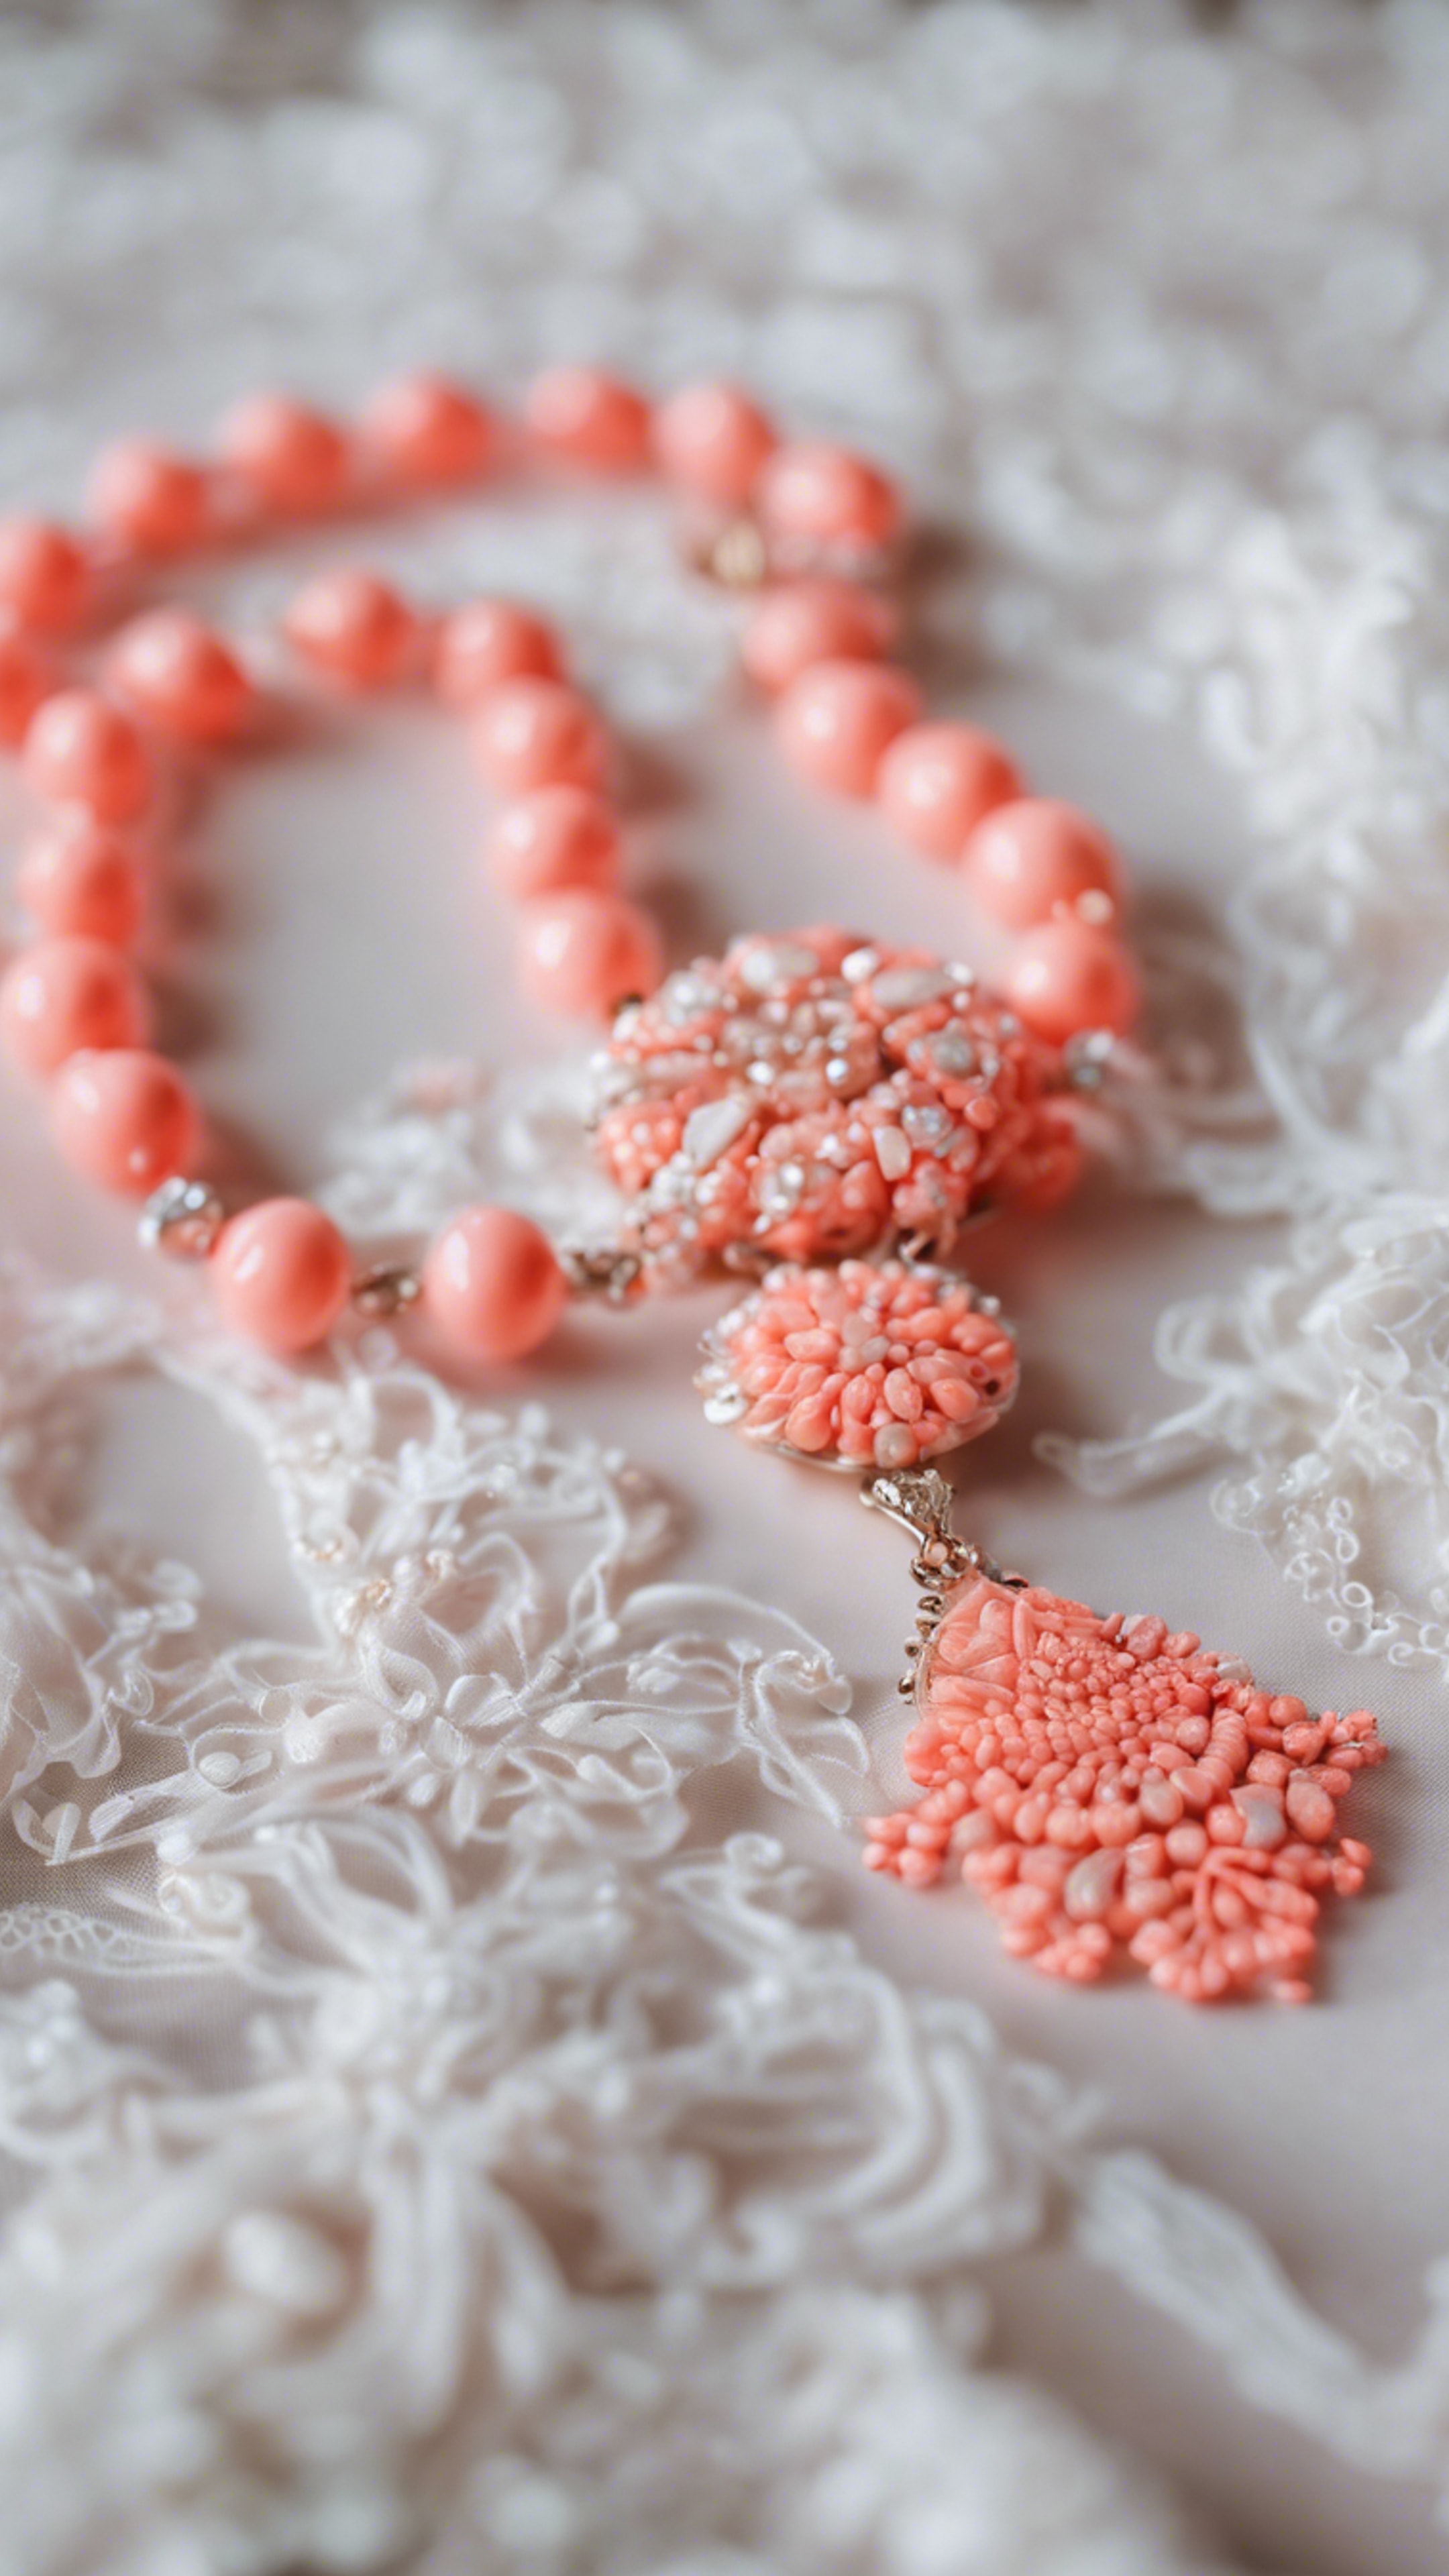 A preppy neon coral necklace against a white lace dress. Tapeet[7558fb99fbaf41faa5f9]